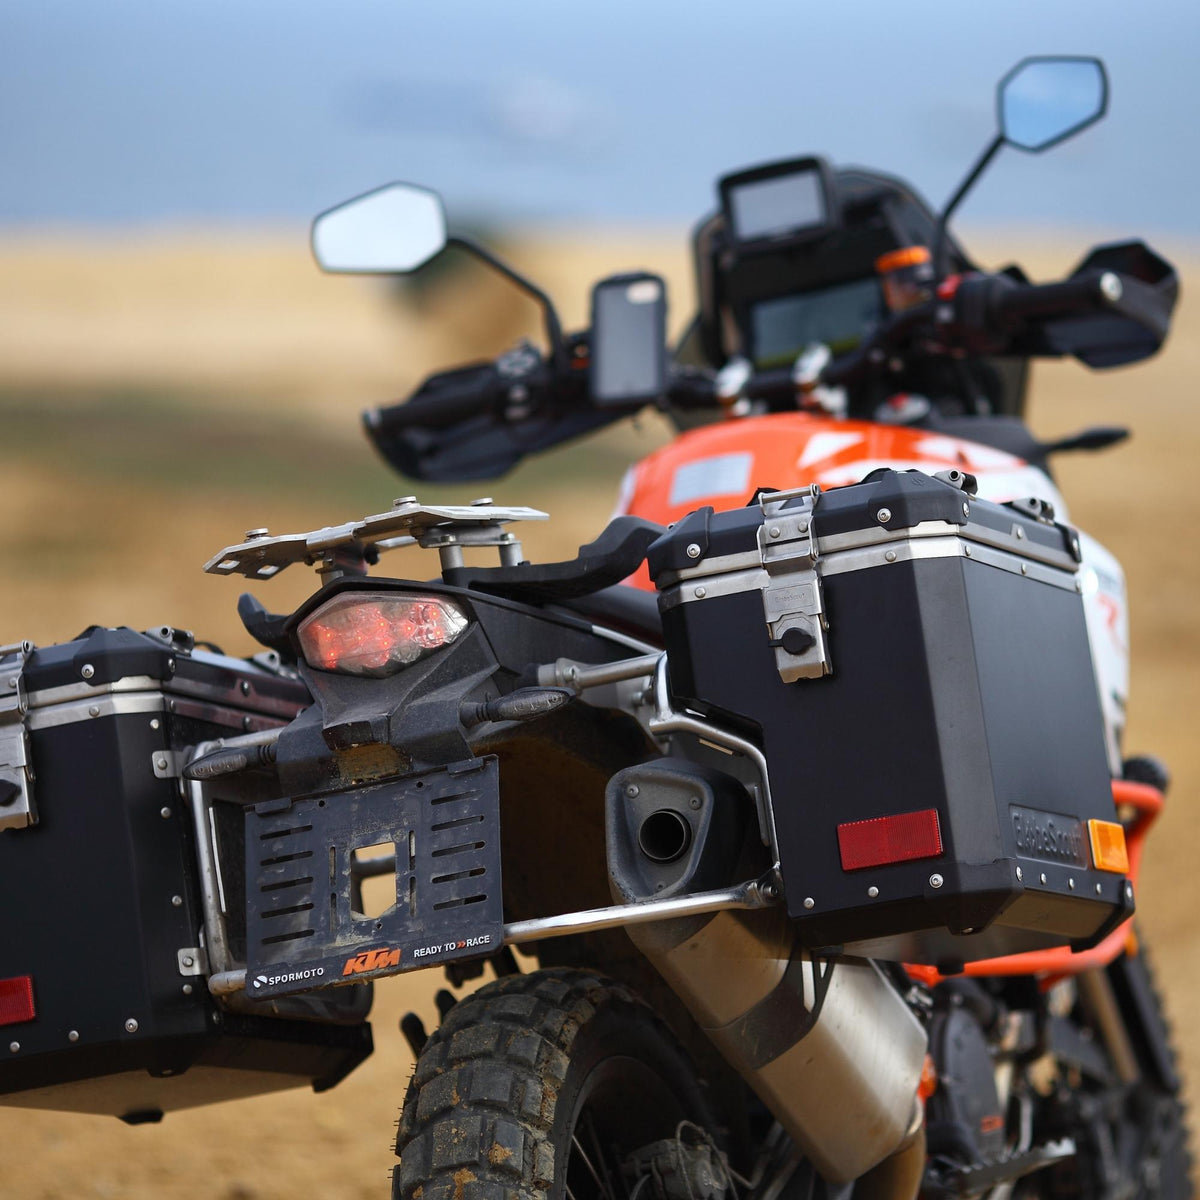 GlobeScout USA, XPAN+ Aluminum Side Case Set, KTM 1050 / 1190 / 1290 Adventure (2013- 2020), 2.02.02801, adventure bike luggage, adventure motorcycle panniers, aluminum side cases, GlobeScout motorcycle luggage, GlobeScout XPAN+, KTM, KTM 1050, KTM 1190, KTM 1290 Adventure, Side Case Set, XPAN+, Side Case Sets - Premium handmade adventure equipment including side cases (panniers) and top cases made from high strength aluminum magnesium alloy with high grade stainless steel hardware, locks, and dual seal lid